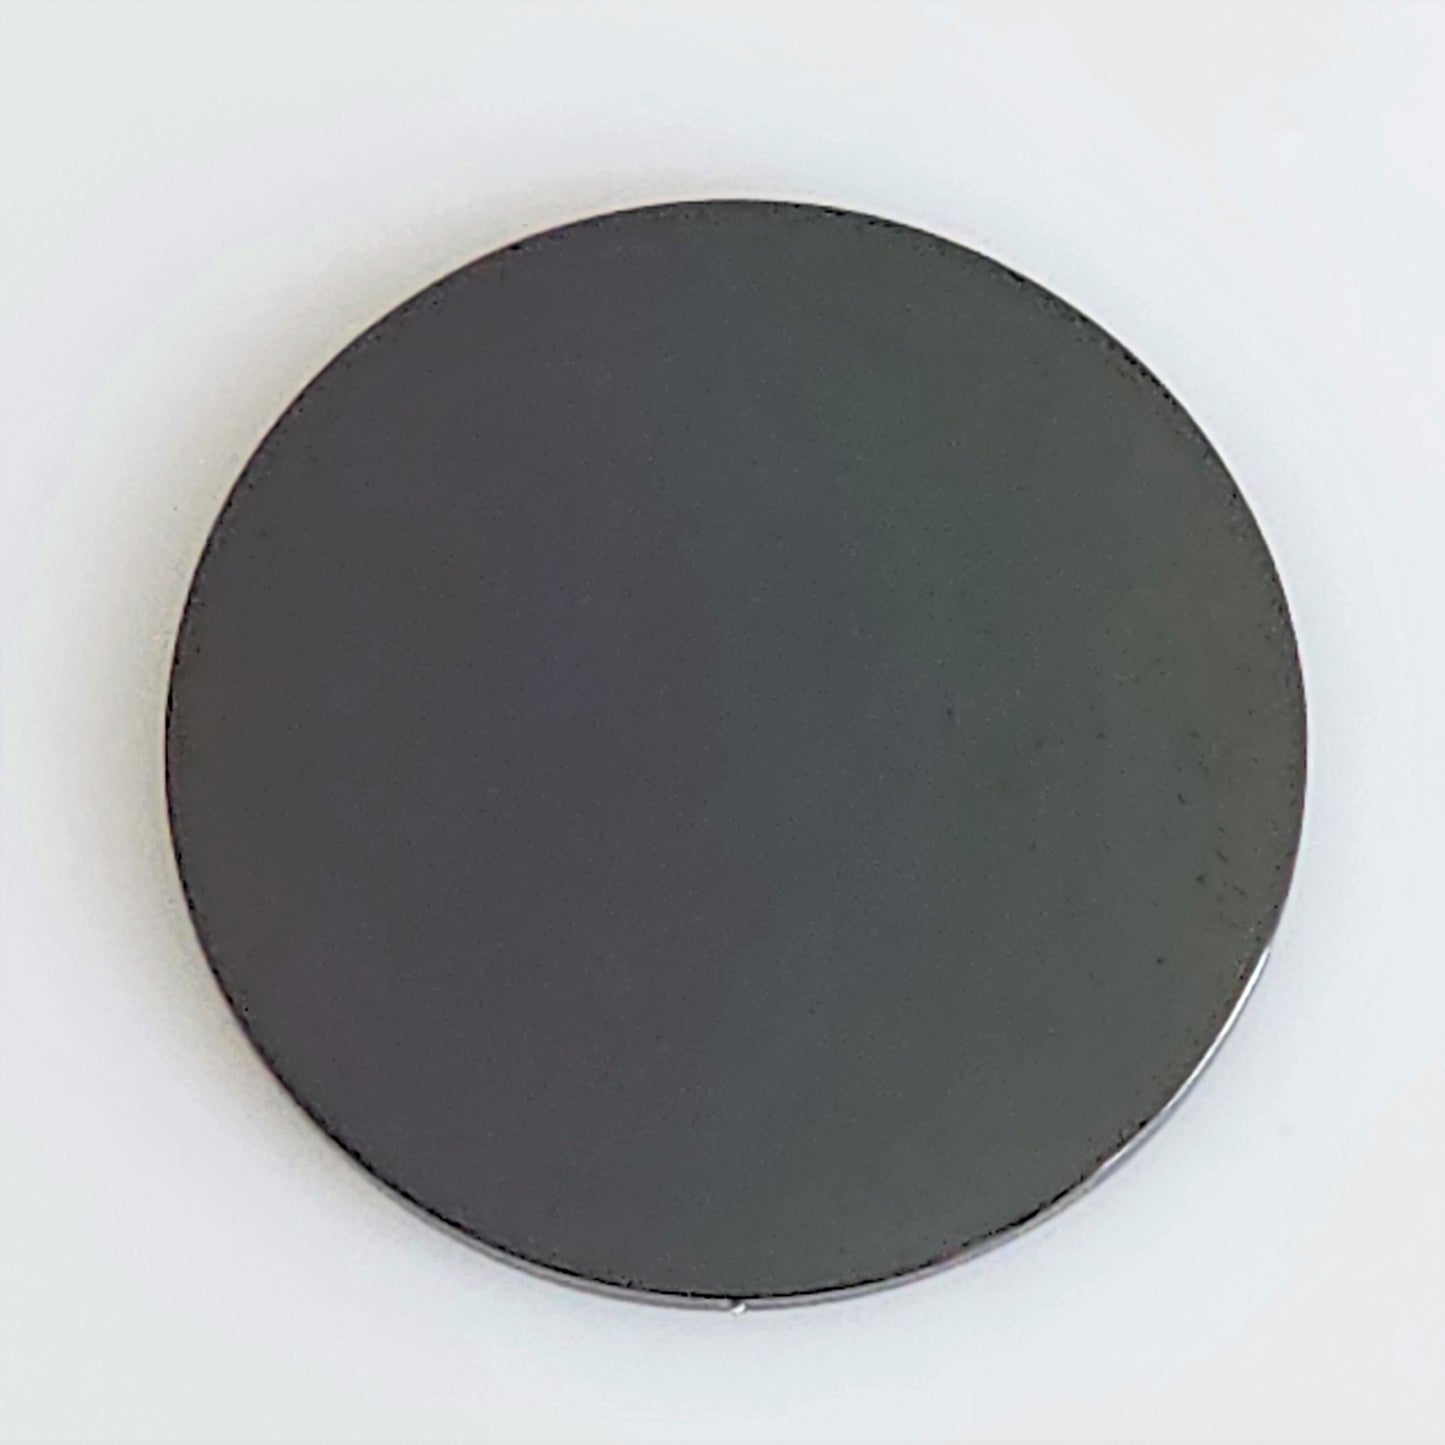 Black Plated Stainless Steel - 1" Circle (no hole)